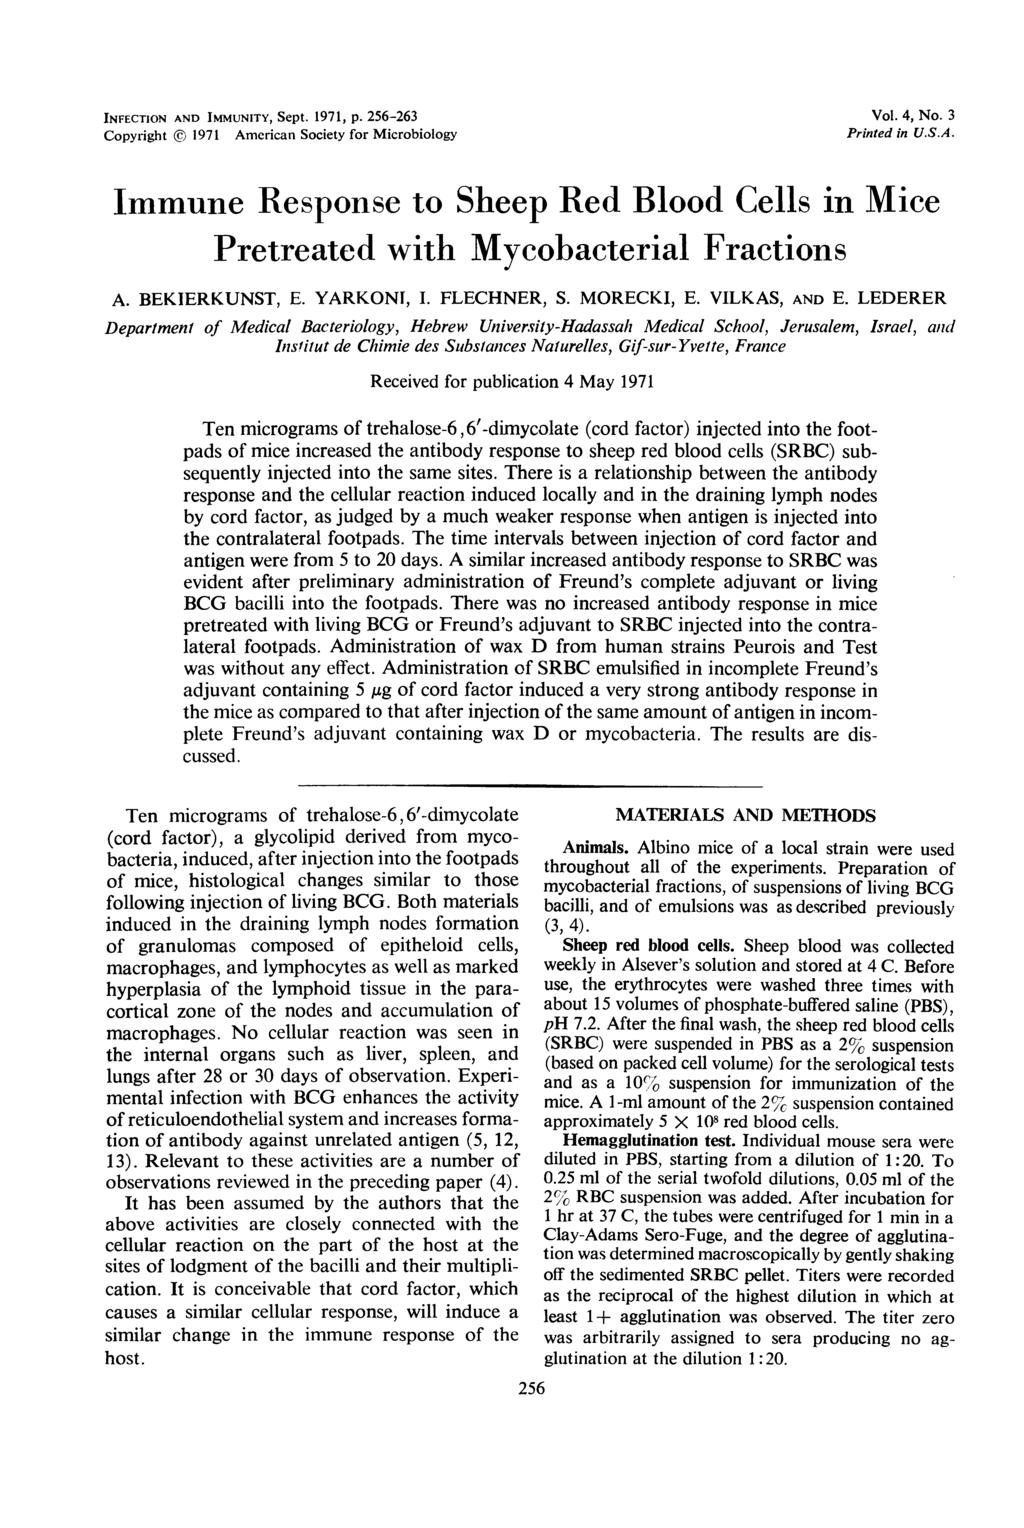 NFECTON AND MMUNTY, Sept. 1971, p. 256-263 Copyright 1971 Amerian Soiety for Mirobiology Vol. 4, No. 3 Printed in U.S.A. mmune Response to Sheep Red Blood Cells in Mie Pretreated ith Myobaterial Frations A.